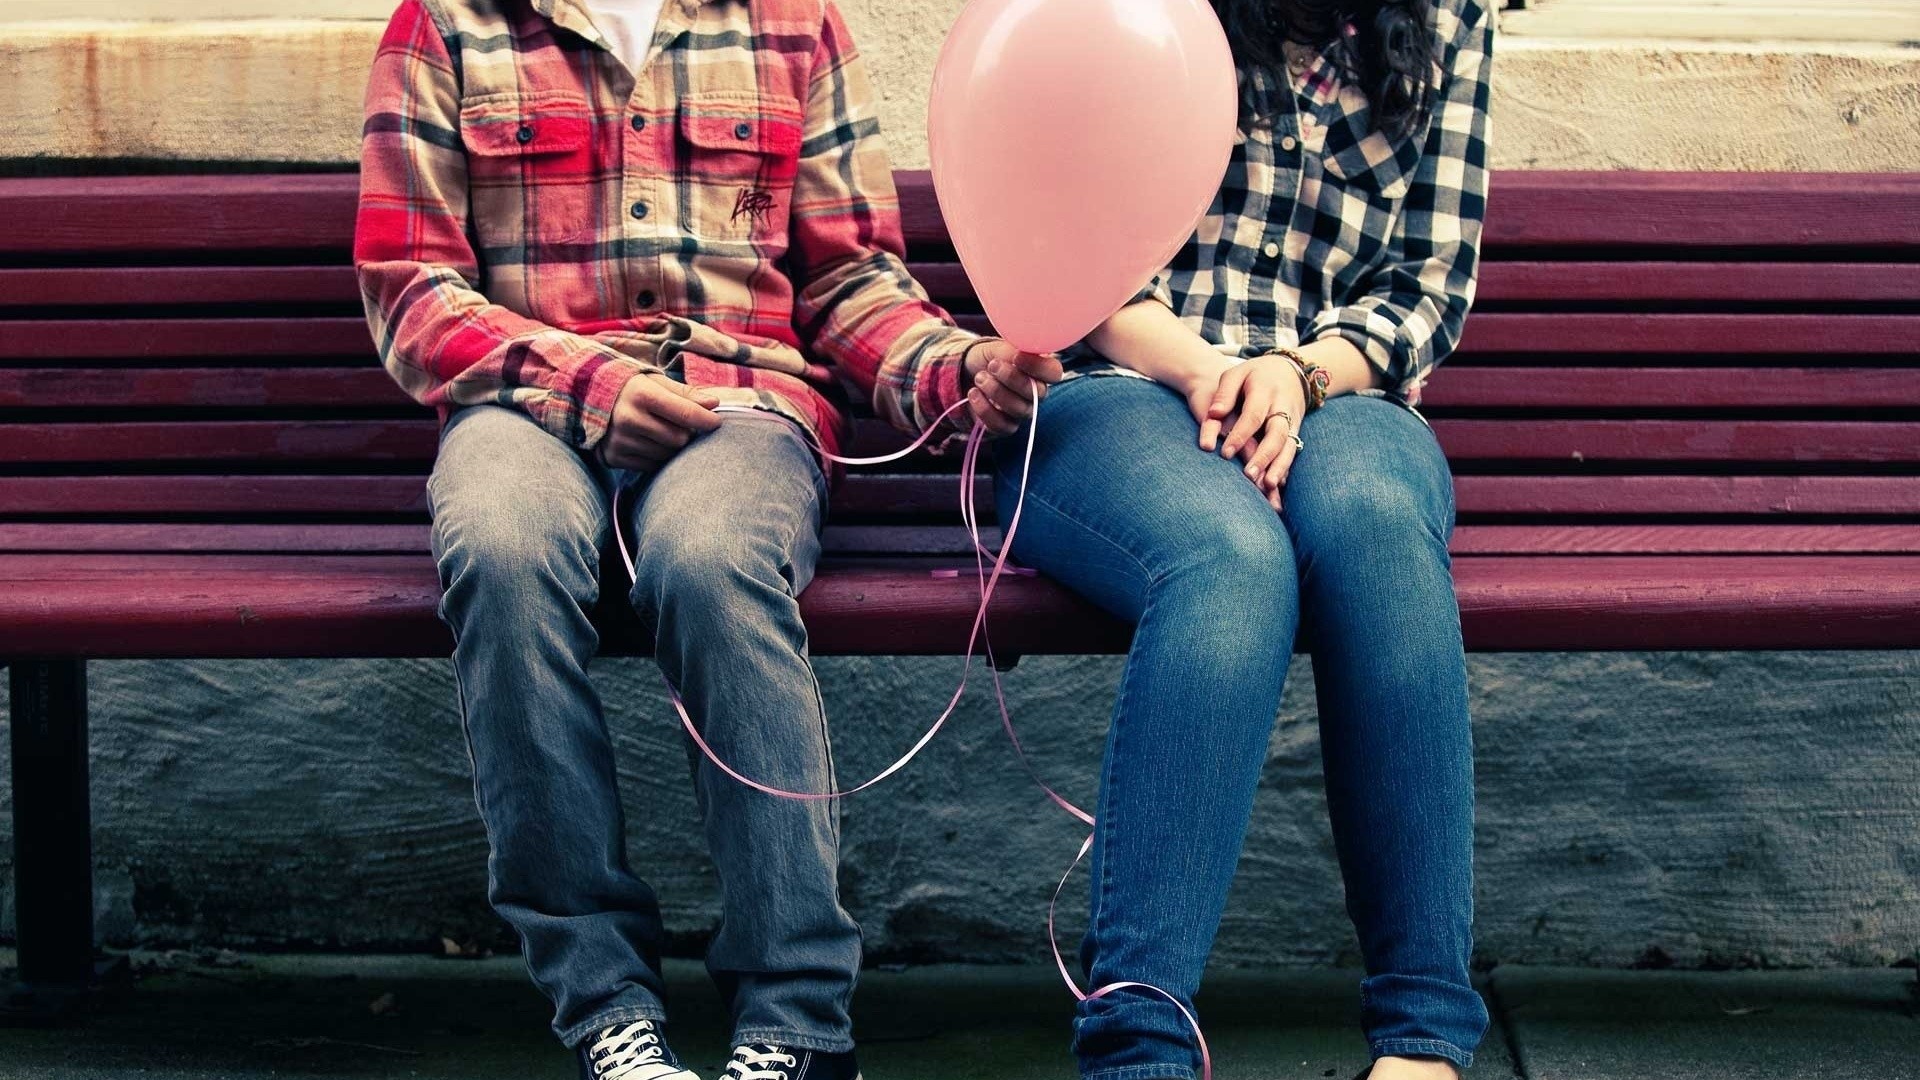 Cute Couple On The Bench Widescreen Wallpaper Wide